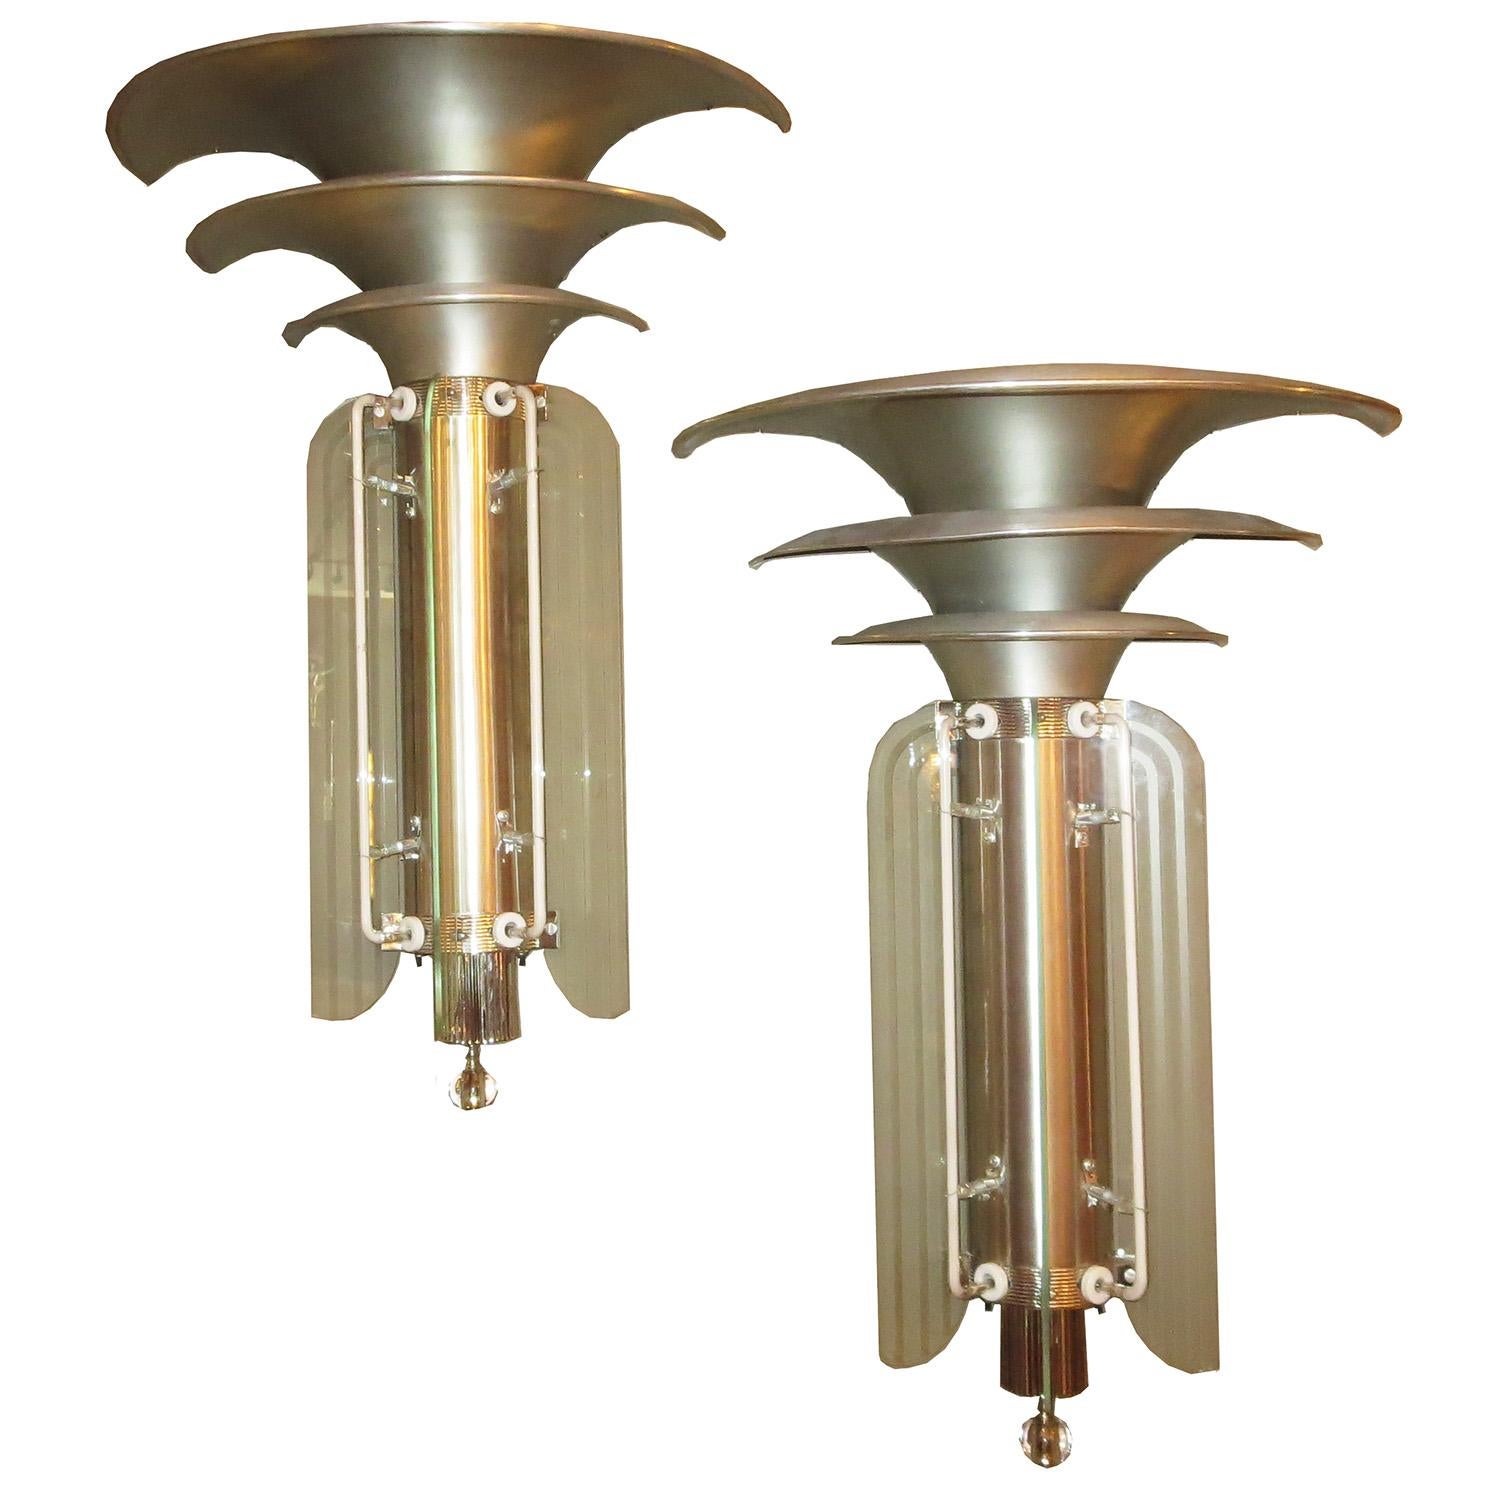 Art Deco Movie Theatre Wall Sconces in a Large-Scale